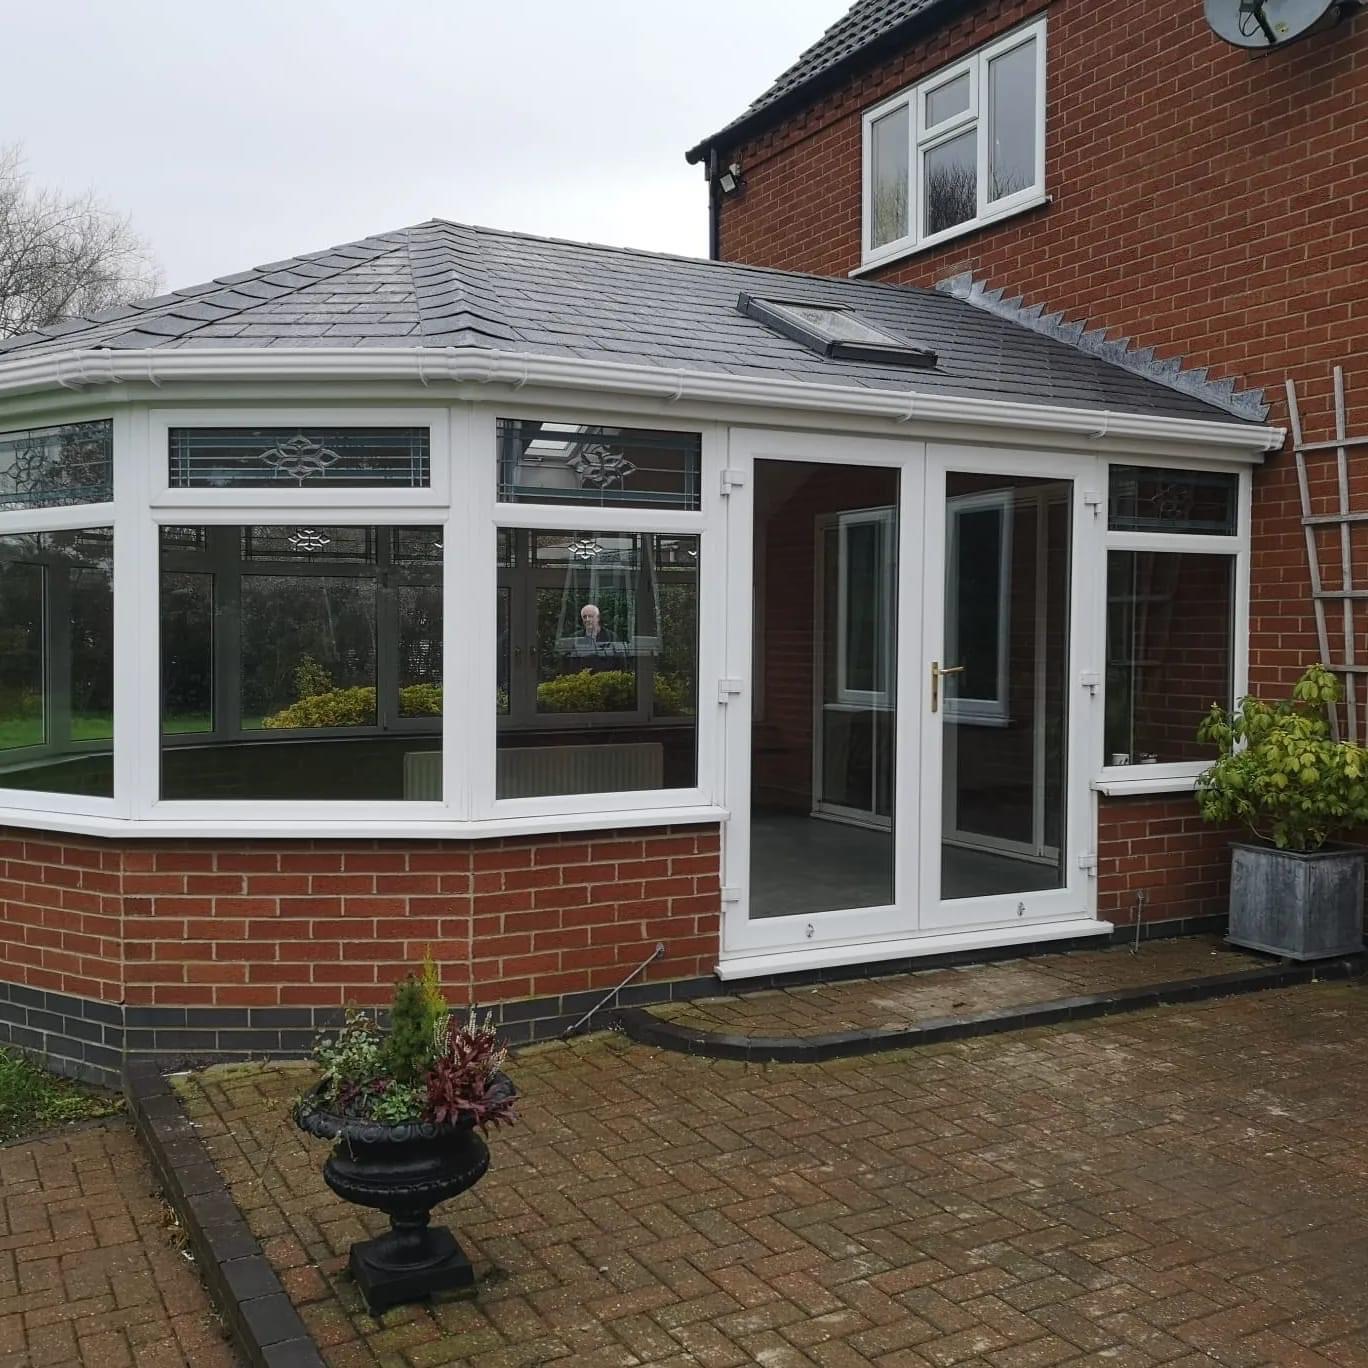 Outside view of tiled conservatory with wite frames and grey slate and next to potted plants